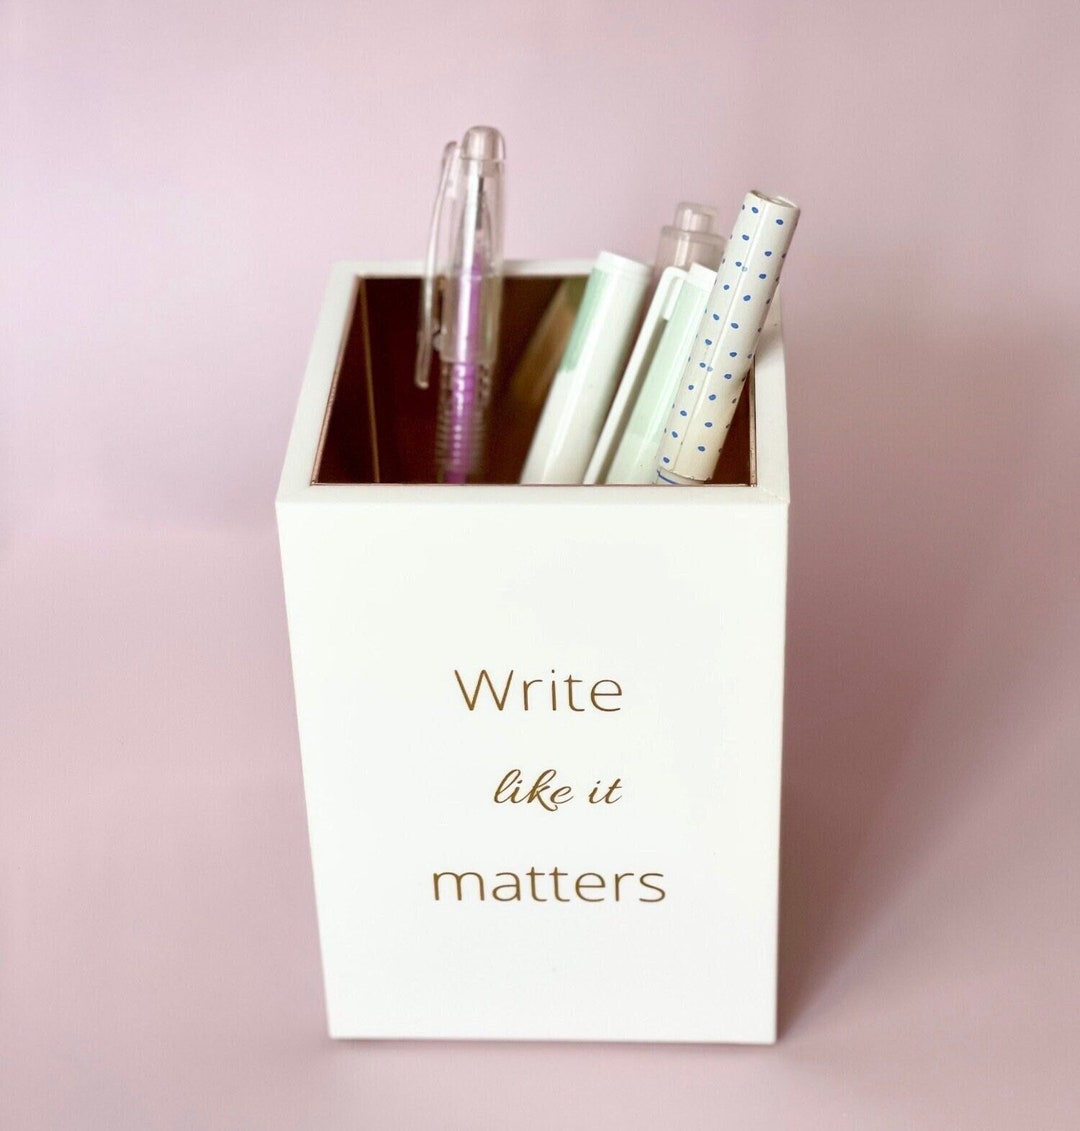 Funny Quotes and Sayings Design Custom Acrylic Pen Holder